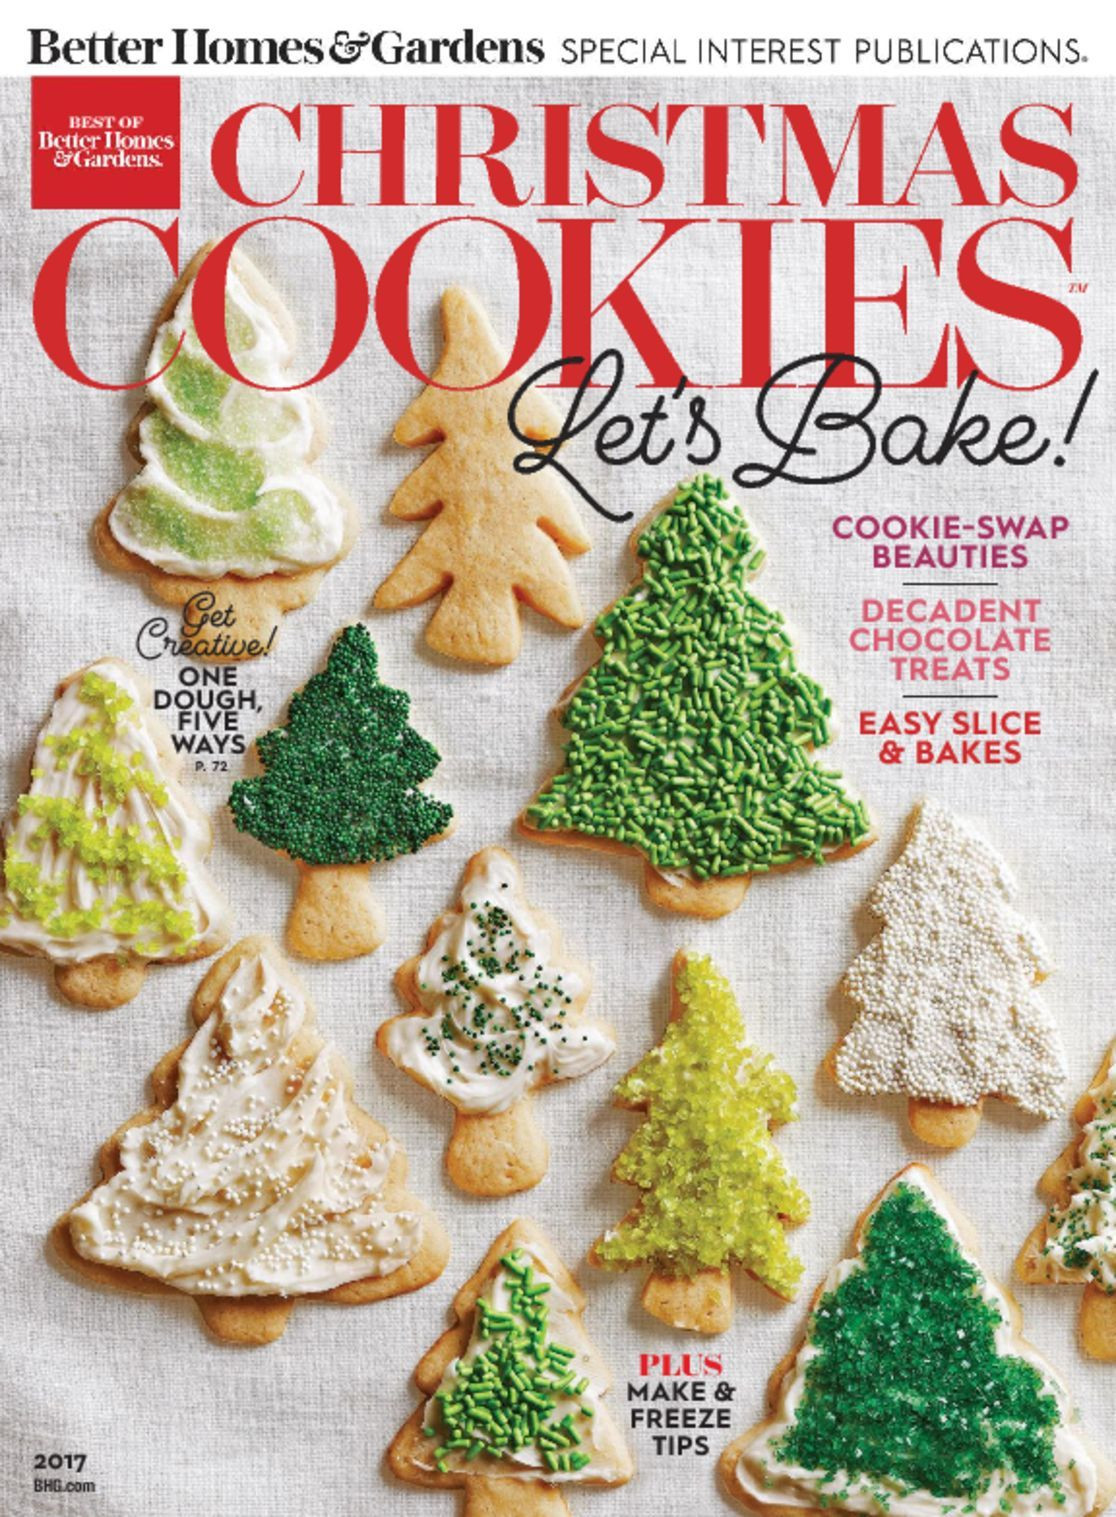 Better Homes And Gardens Christmas Cookies
 Best of Better Homes & Gardens Christmas Cookies Magazine